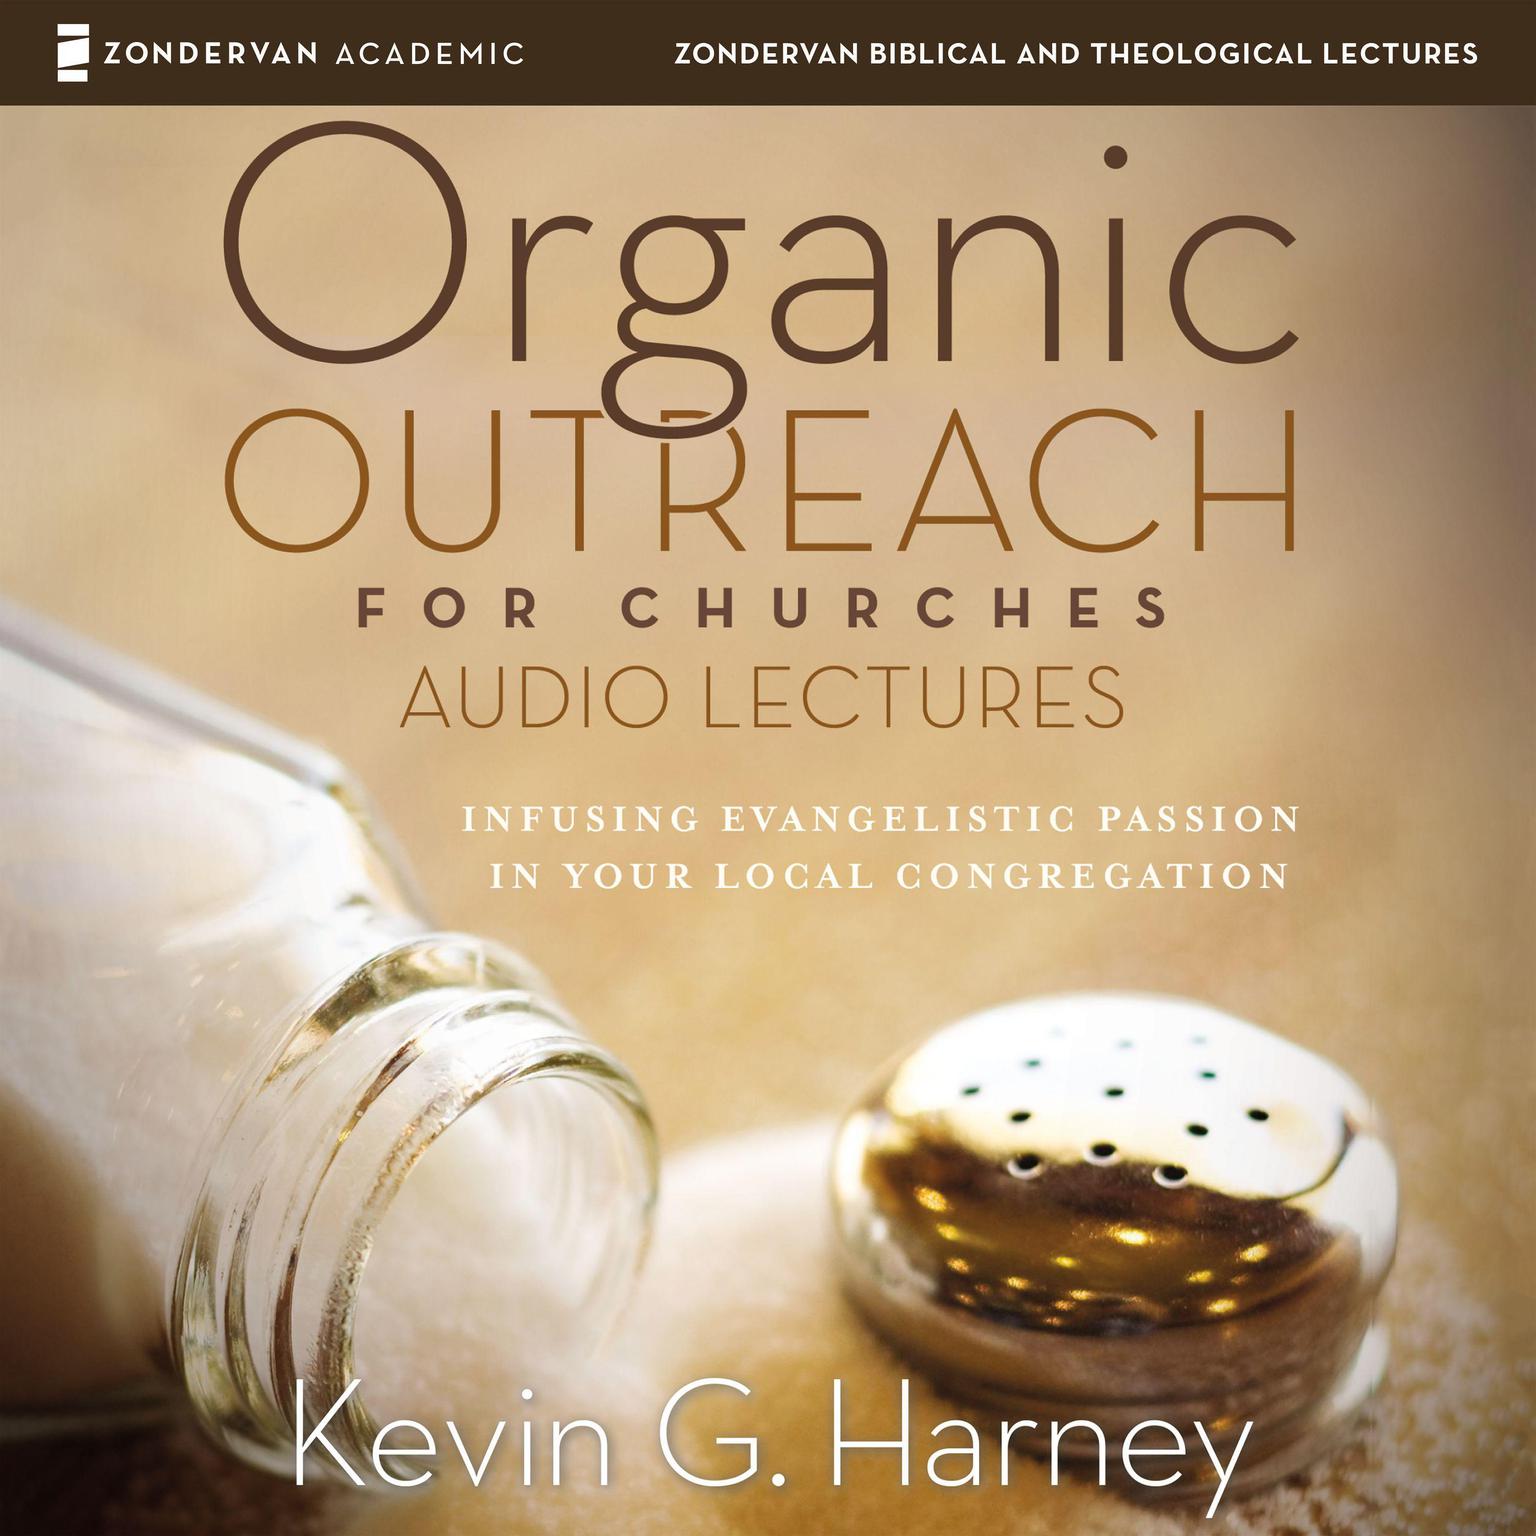 Organic Outreach for Churches: Audio Lectures: Infusing Evangelistic Passion into Your Local Congregation Audiobook, by Kevin G. Harney